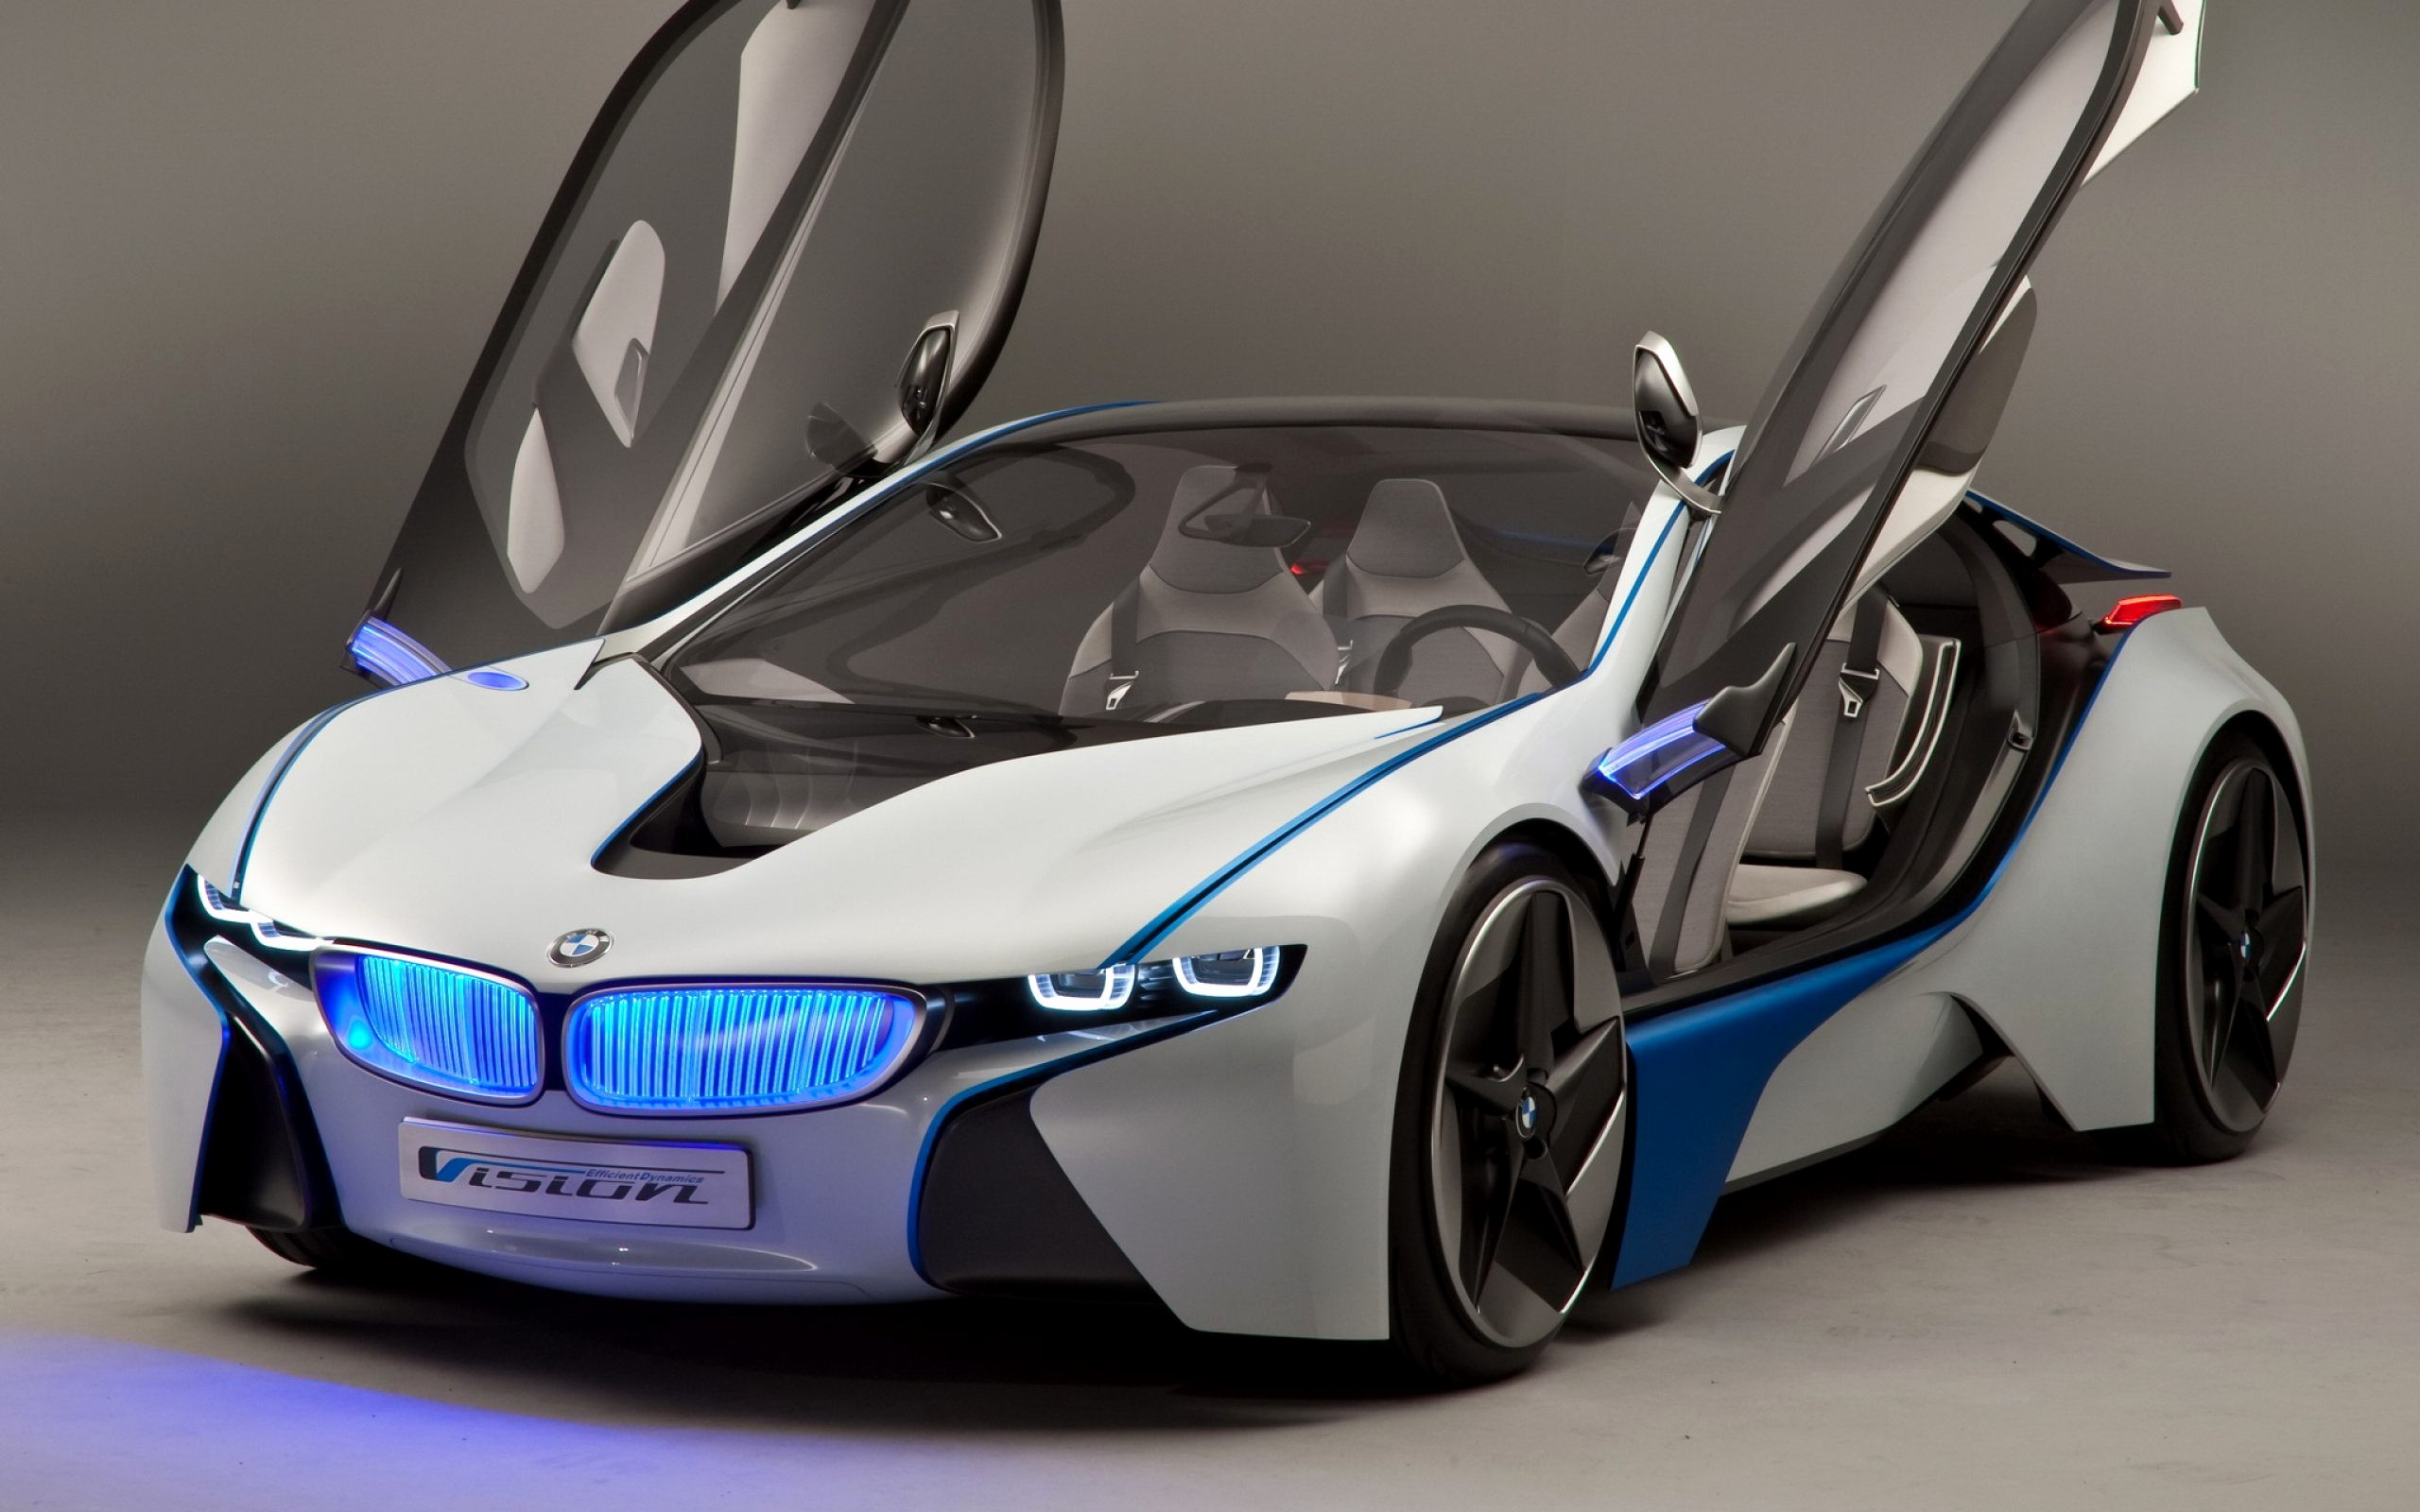 2560x1600 Download Sports Car Wallpaper Elegant Bmw I8 Super Sport Cars Wallpapers  All About Gallery Car